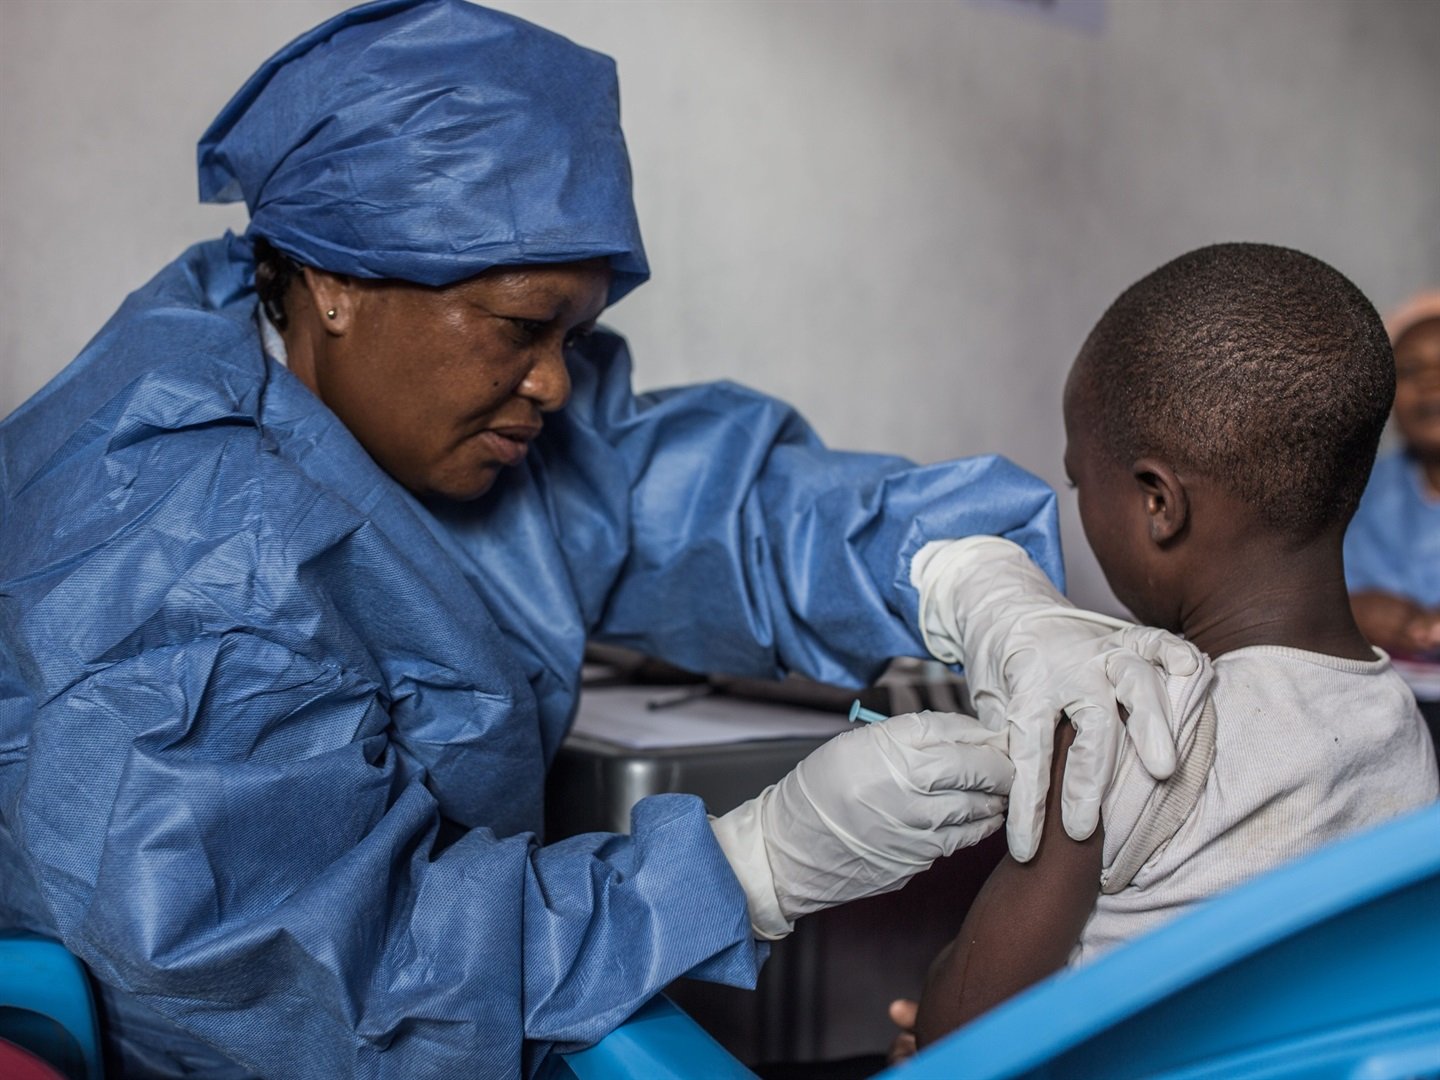 A girl gets inoculated with an Ebola vaccine on November 22, 2019 in Goma, the Democratic Republic of the Congo. 